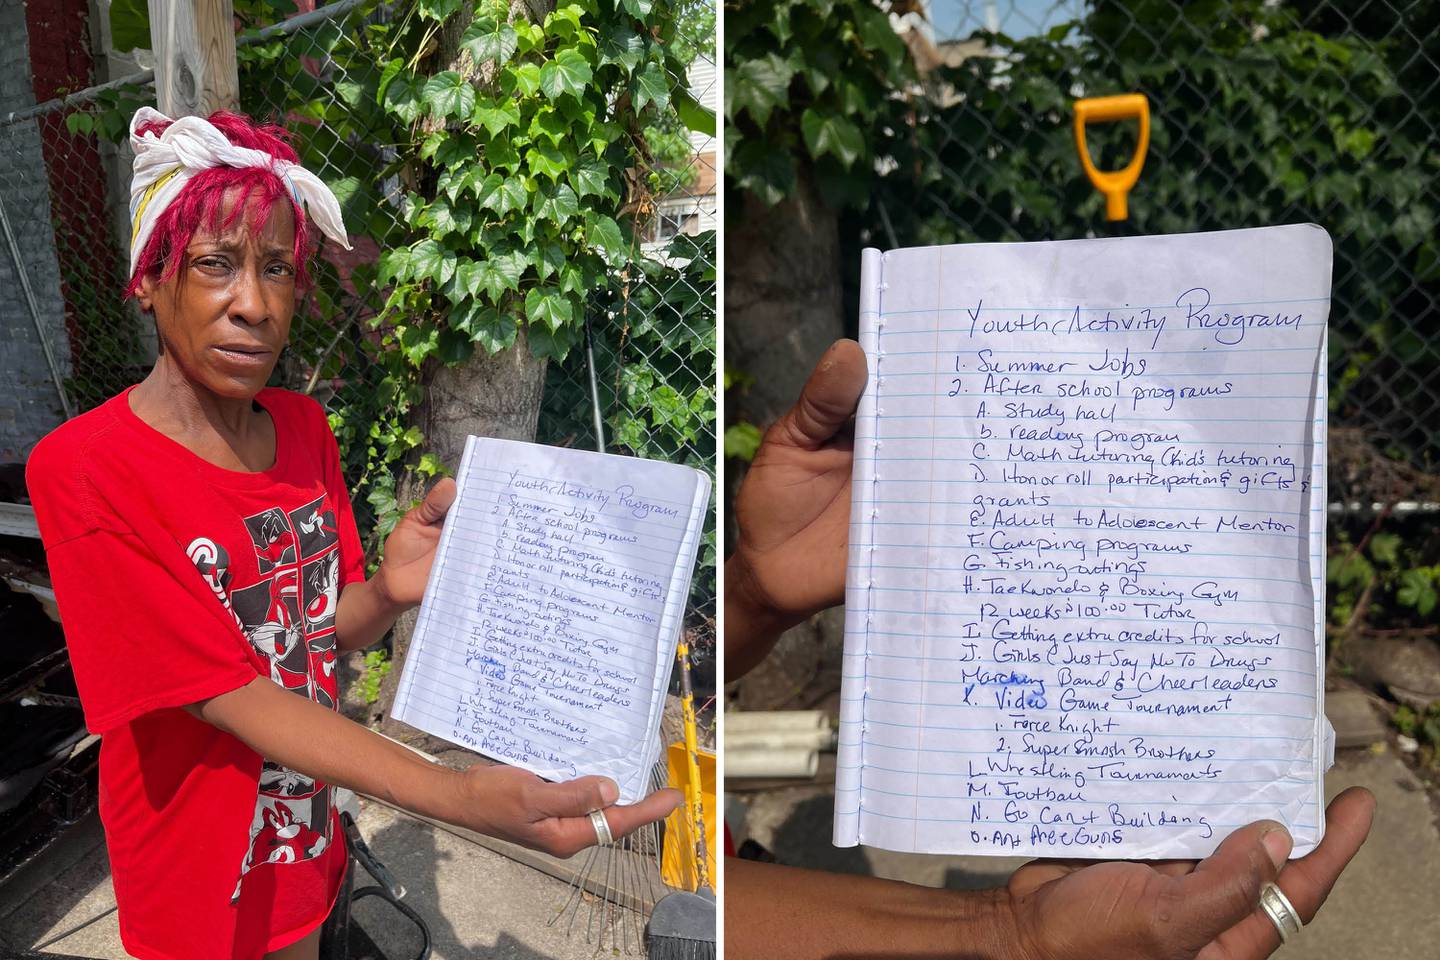 When Linda Young, 53, heard that city leaders wanted to hear from residents how the city could help the neighborhood after a shooting, she started jotting down ideas to help youth.